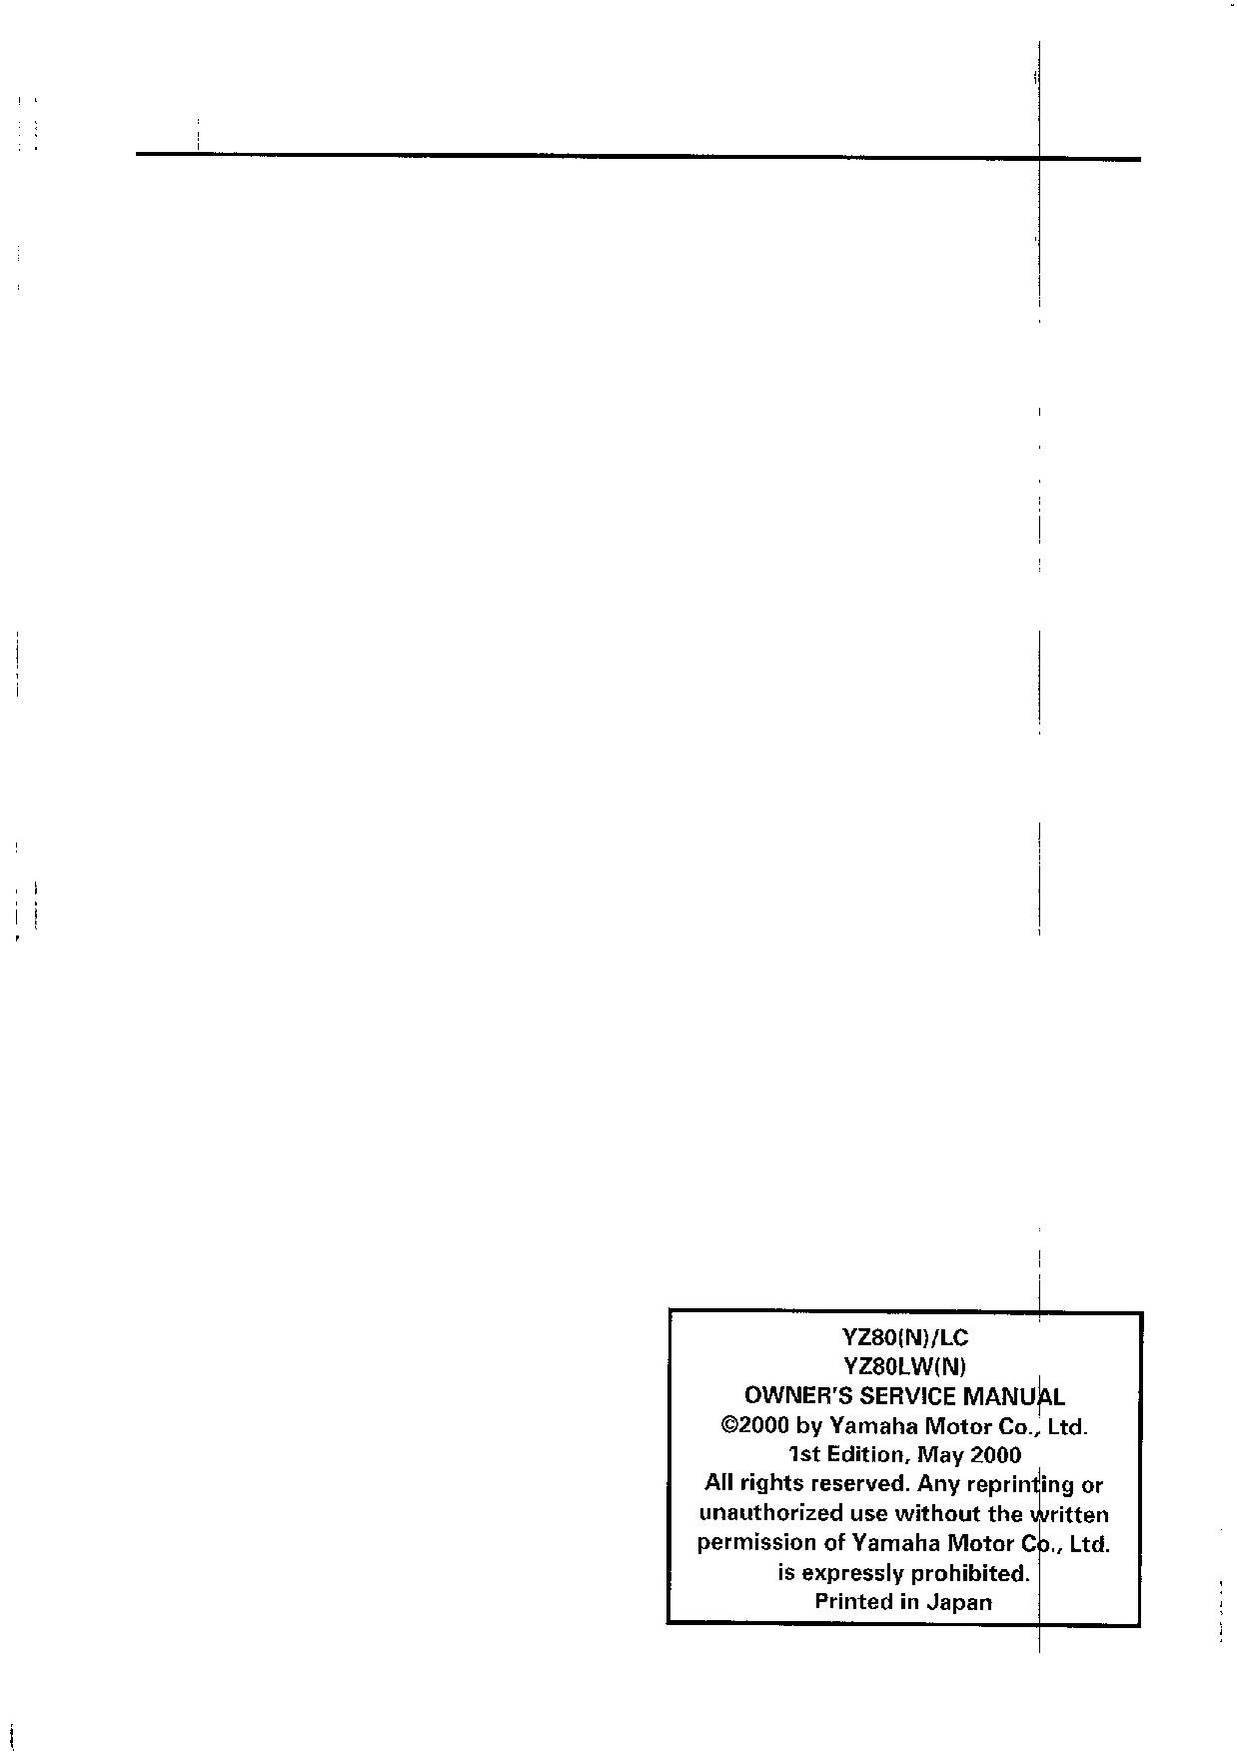 File:2001 Yamaha YZ80 (N) LC or LW (N) Owners Service Manual.pdf